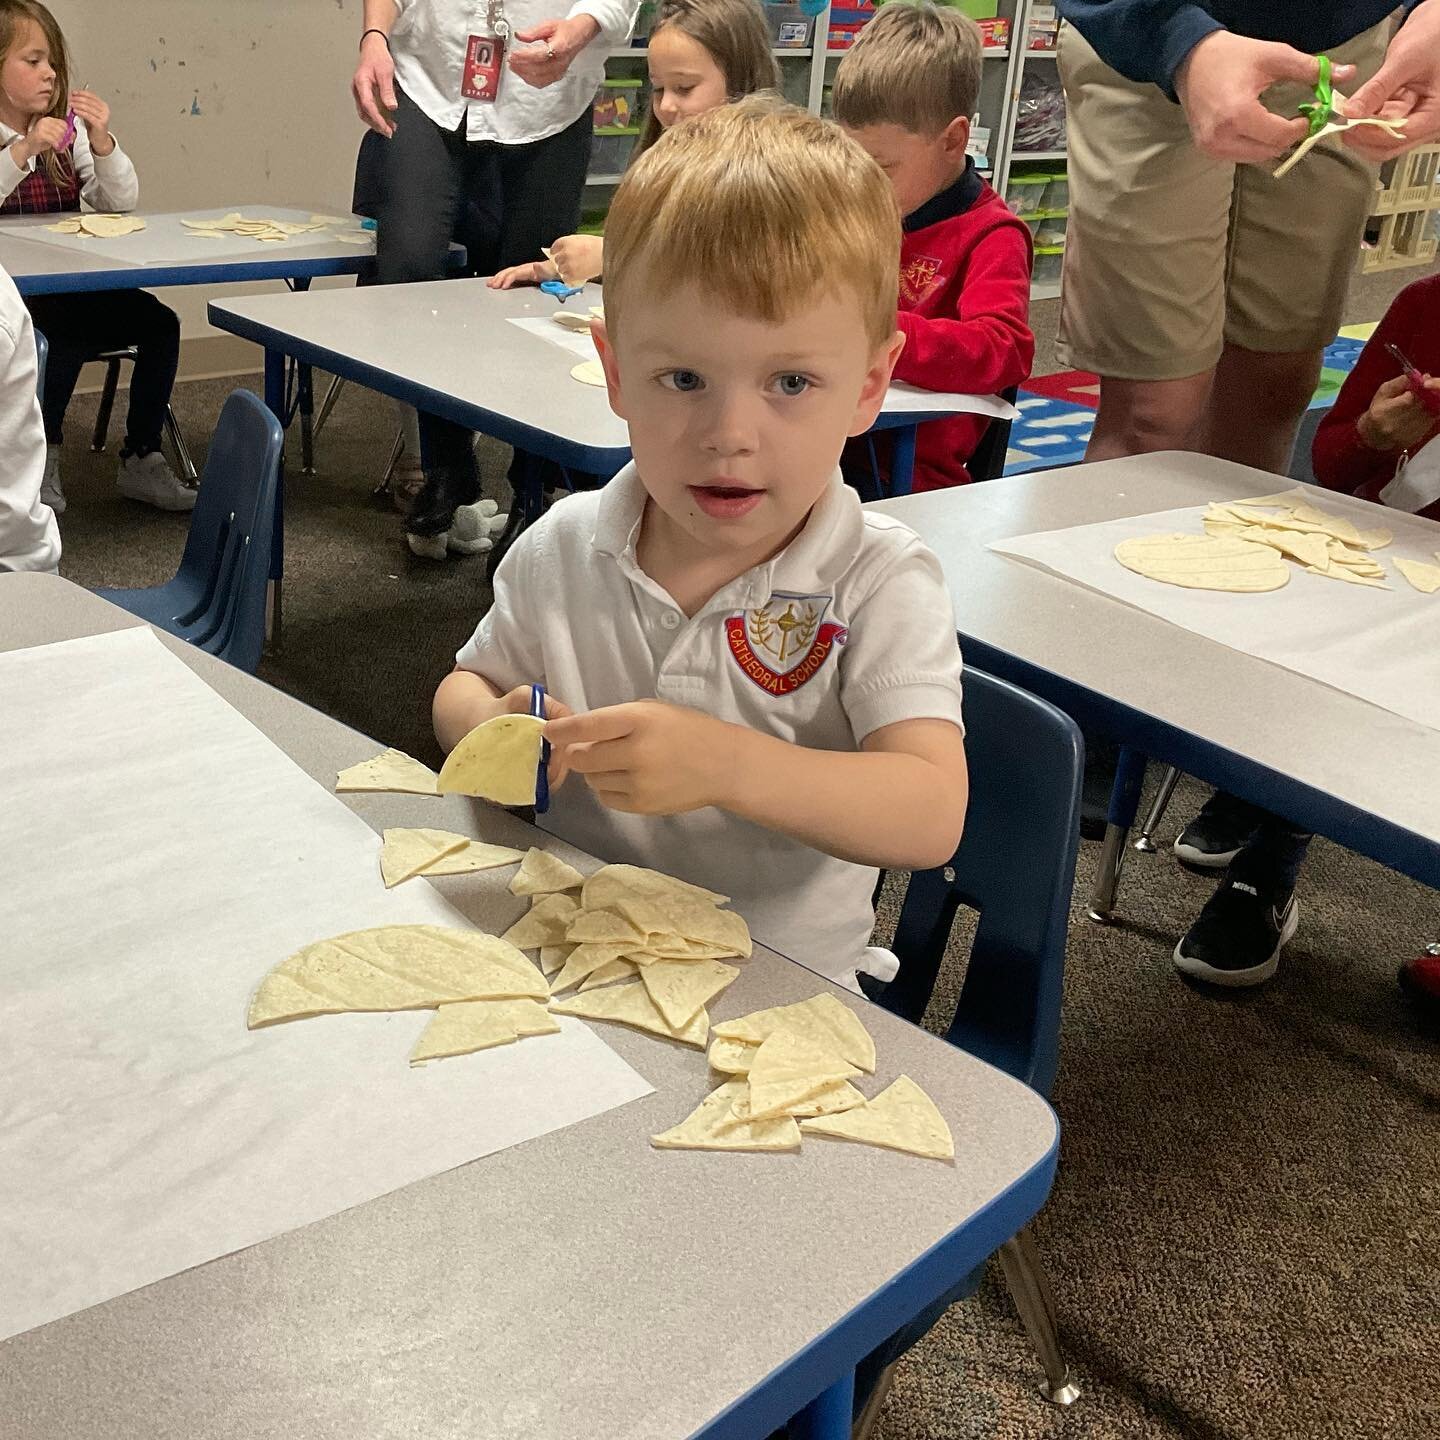 Classroom Happenings:
On Thursdays, Pre-Kindergarten students learn how to cook something special. This week they made tortilla chips for Cinco de Mayo! ❤️
#cathedralschool #catholicschool #prekindergarten #cookingintheclassroom #cincodemayo